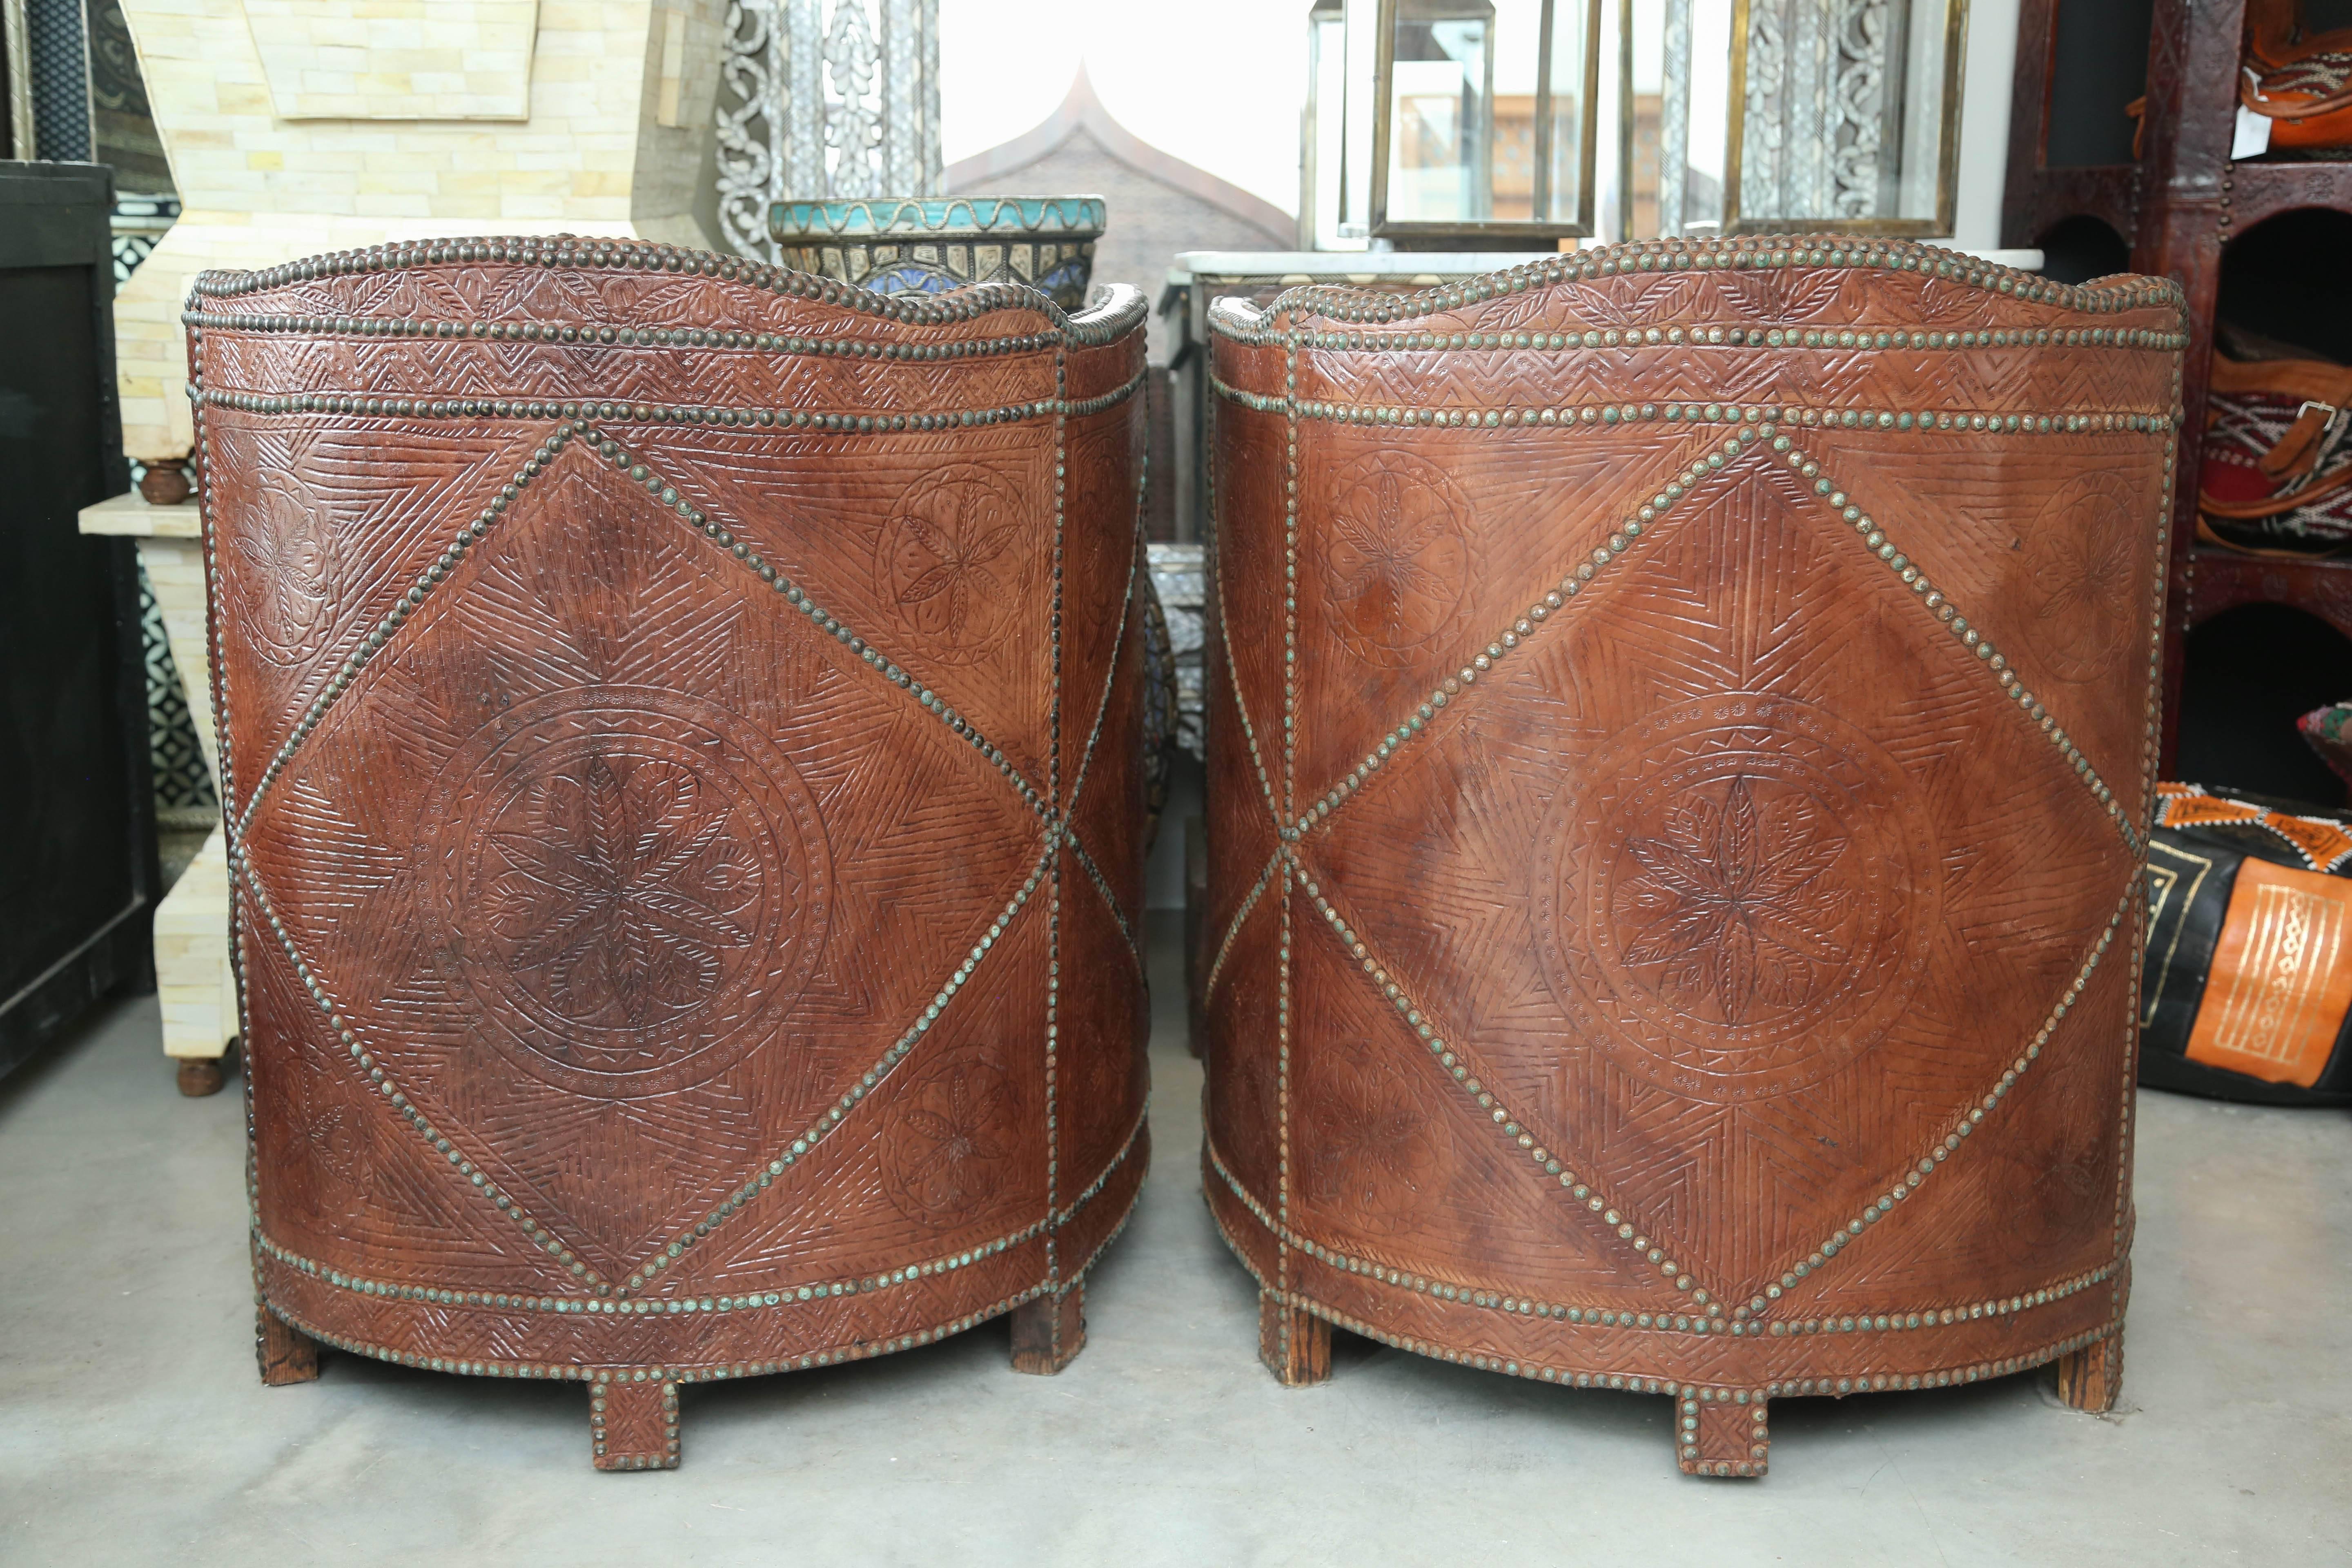 Superb Pair of Vintage Moroccan Leather Barrel Chairs 3